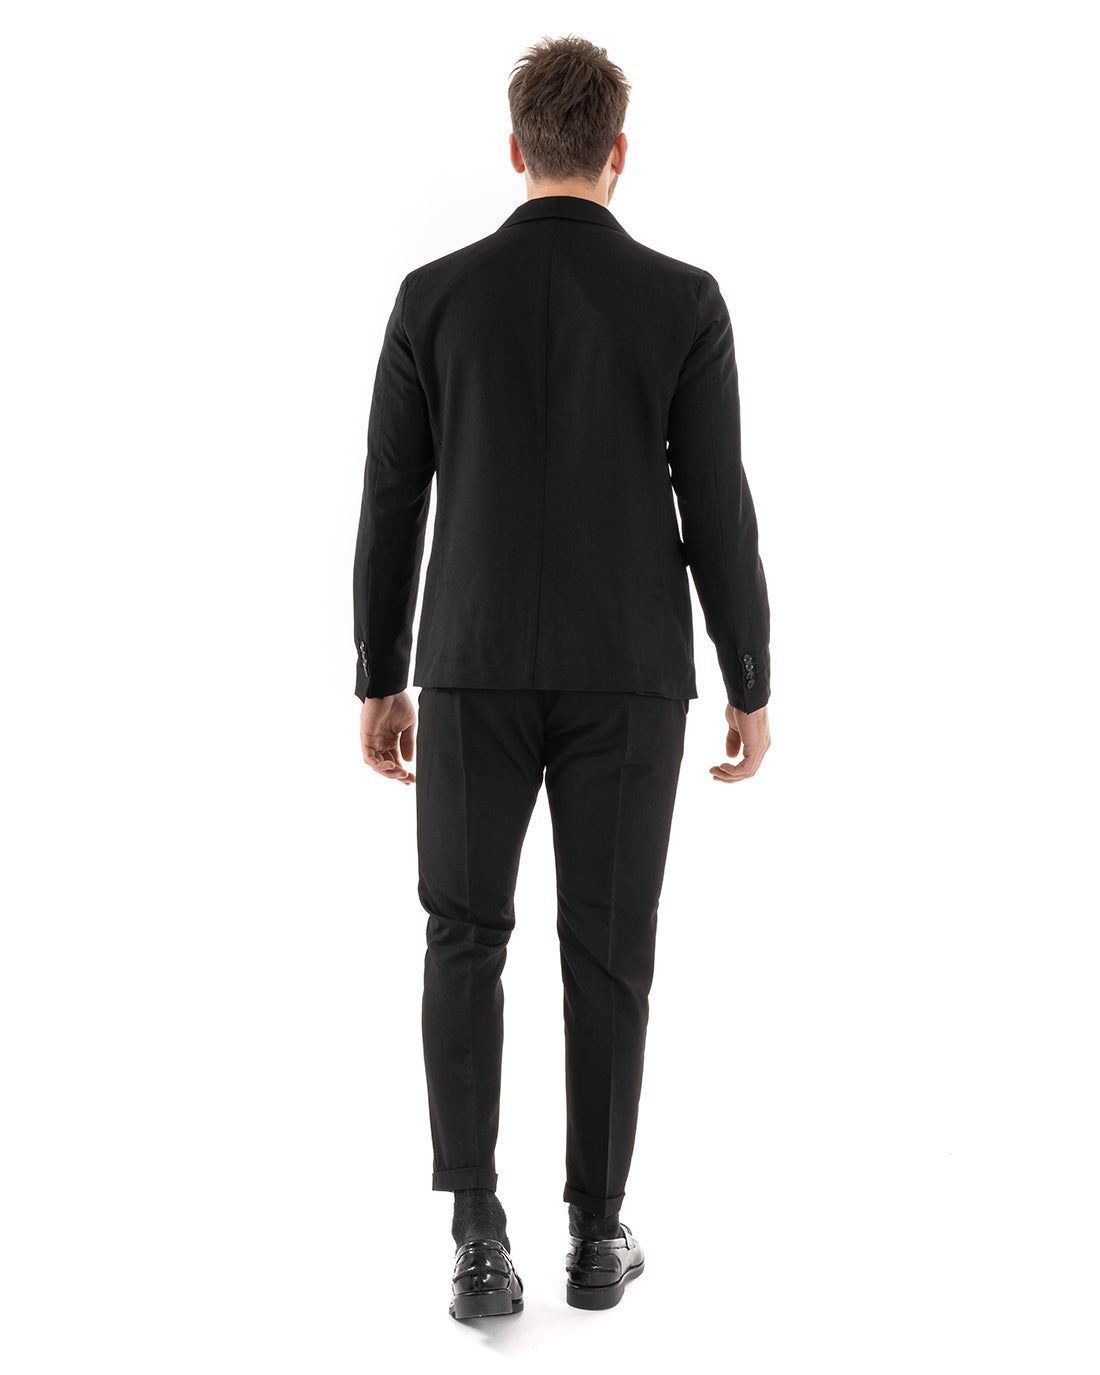 Single-Breasted Men's Suit Tailored Viscose Jacket Trousers Black Elegant Casual GIOSAL-OU2238A